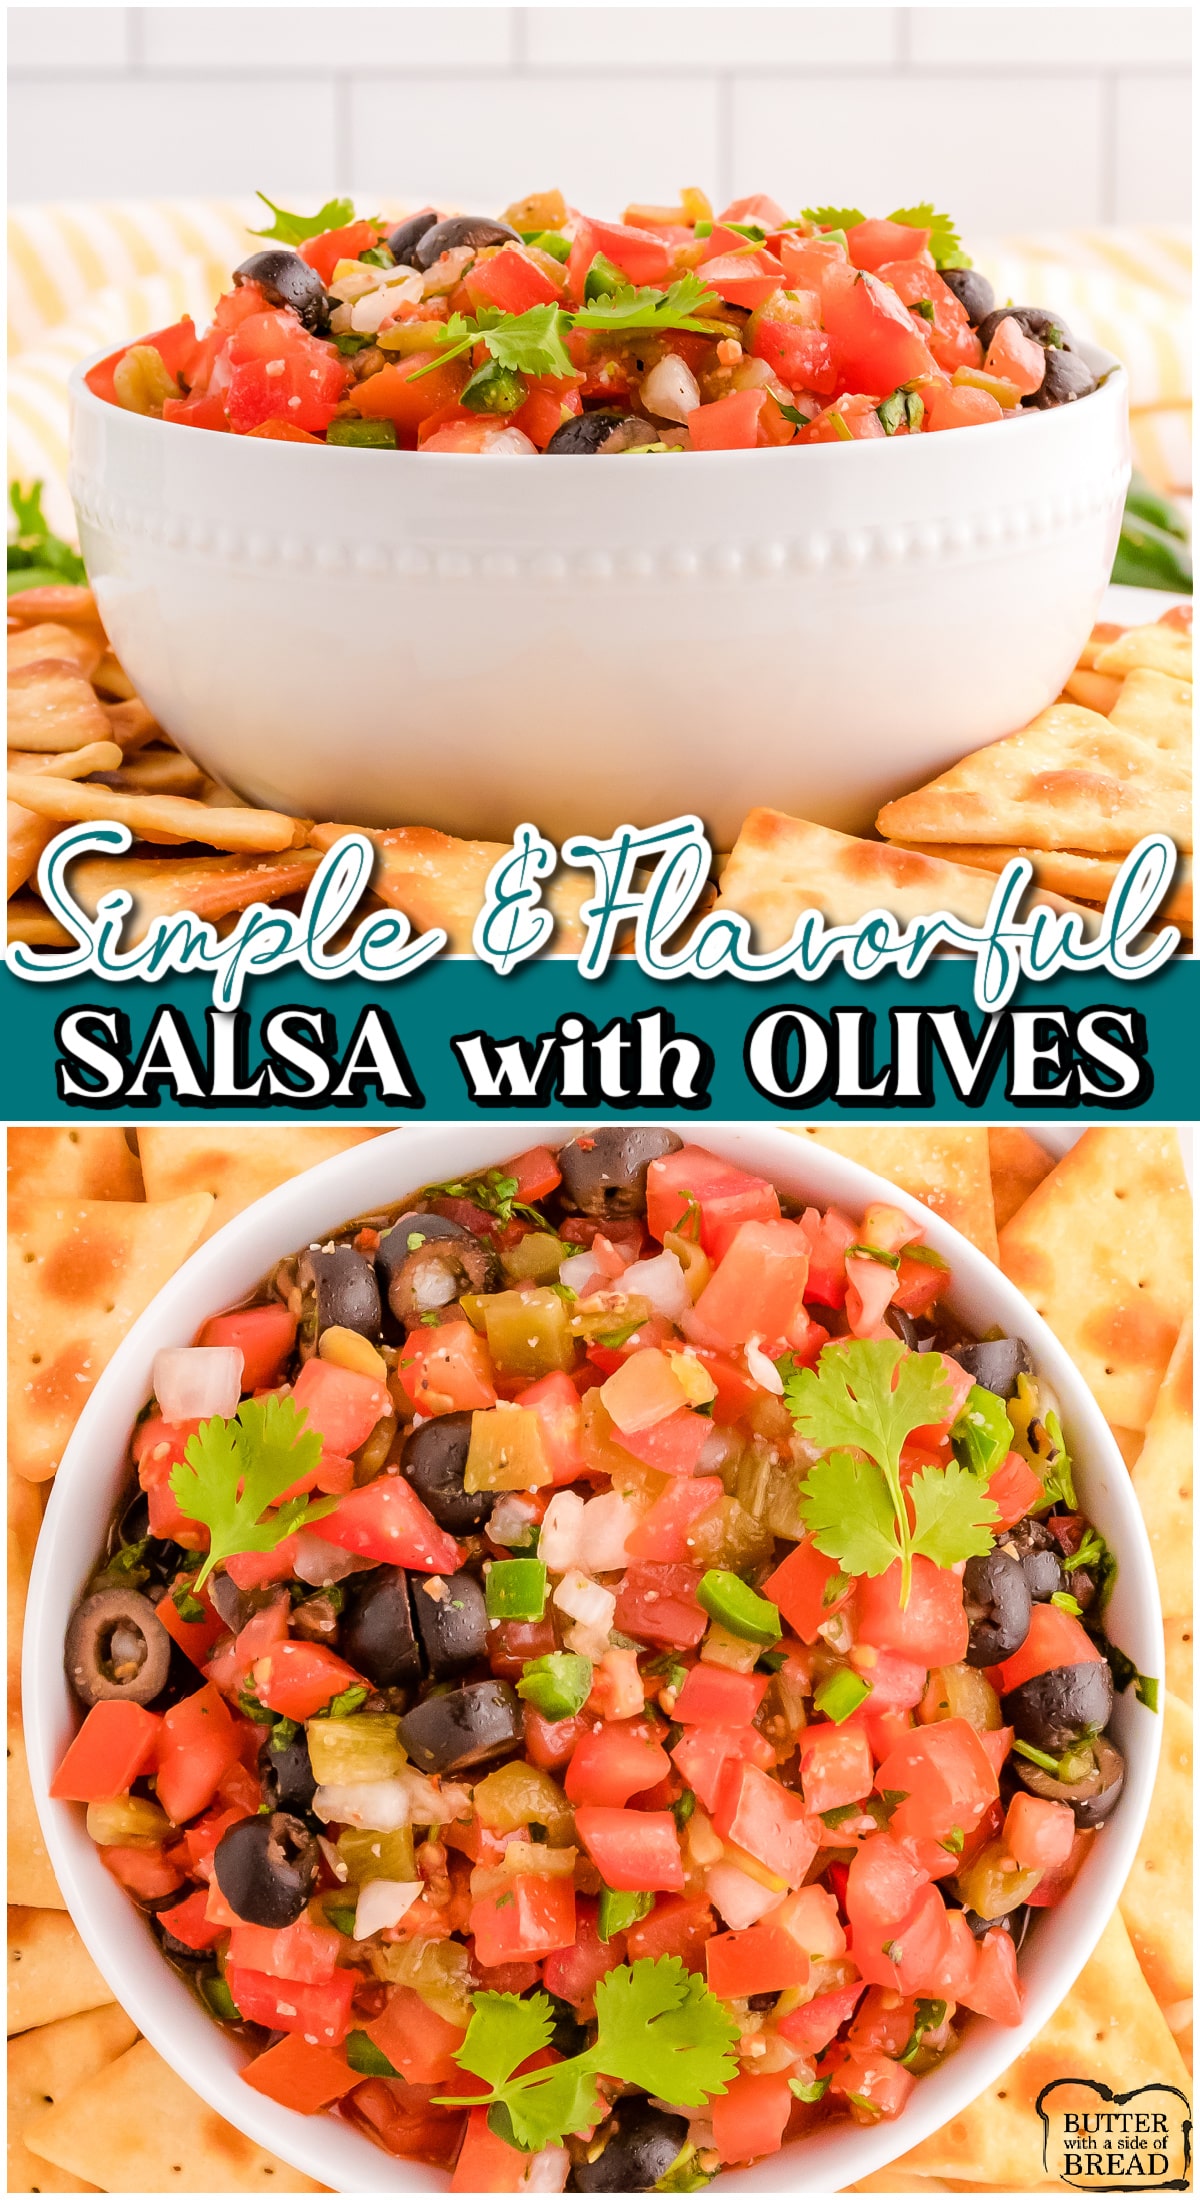 Fresh Garden Salsa with olives is a delightful take on traditional salsa, with green chiles & olives! Bright, fresh flavors in this fantastic homemade salsa, perfect for anytime of the day.